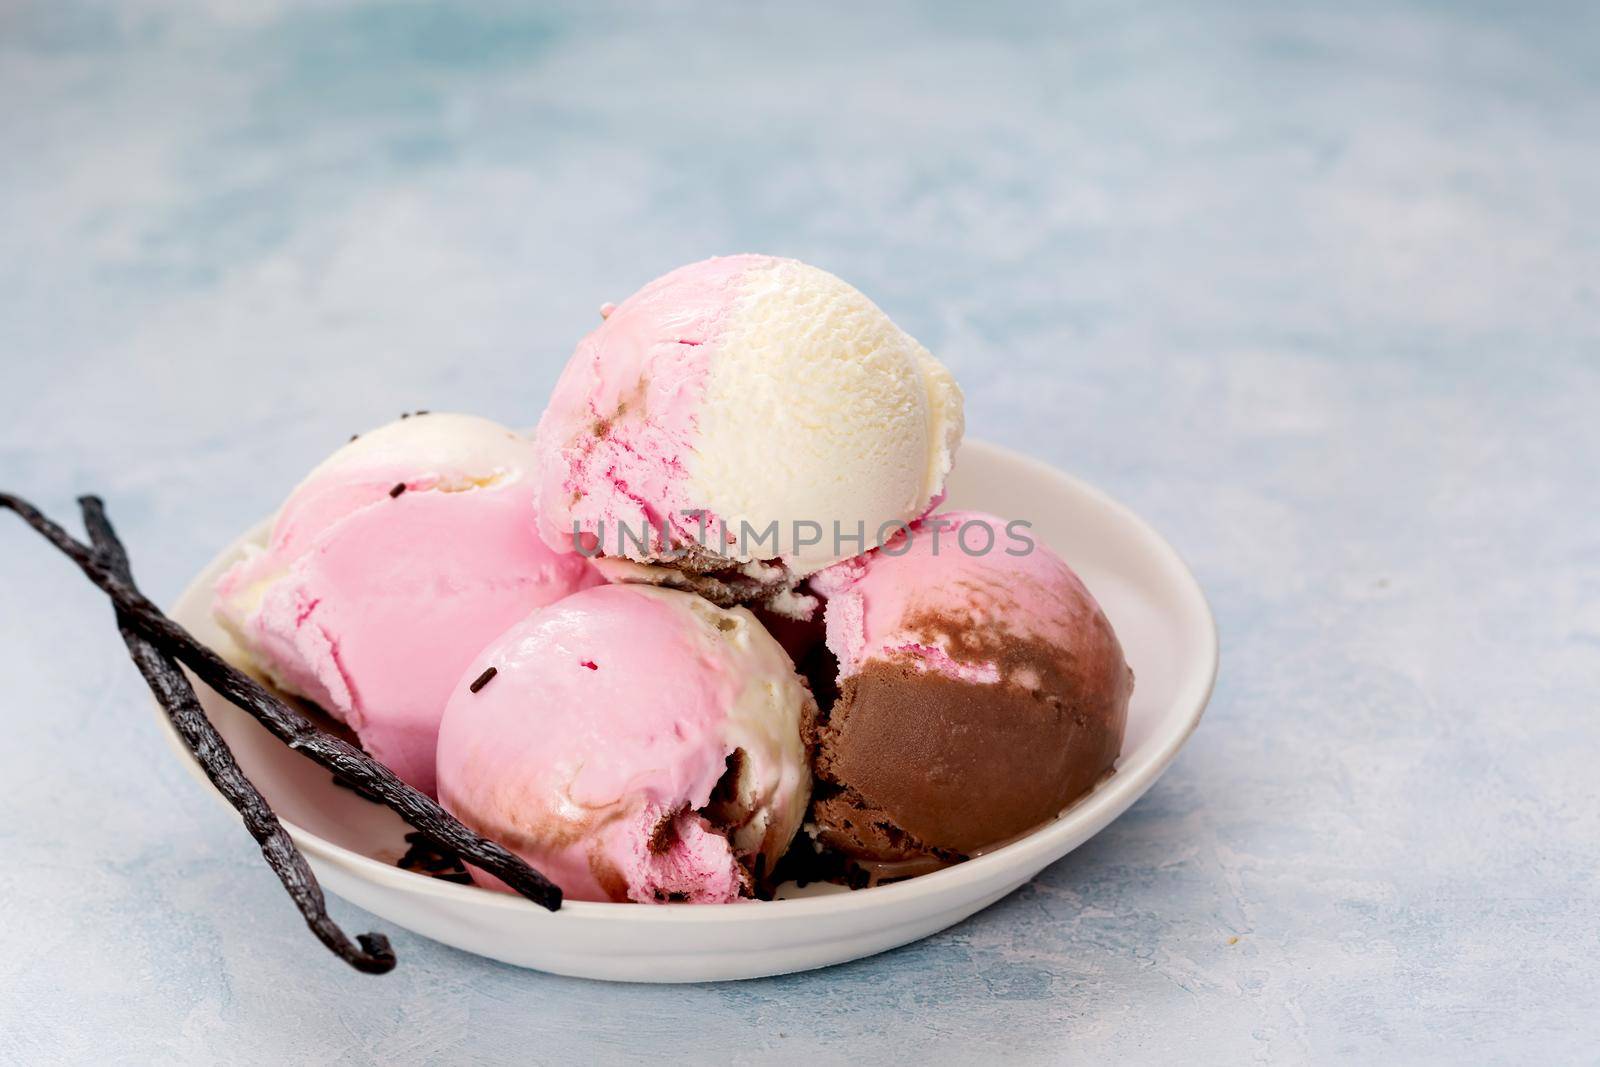 Bowl of Neapolitan ice cream scoops on rustic background. Selective focus, copy space